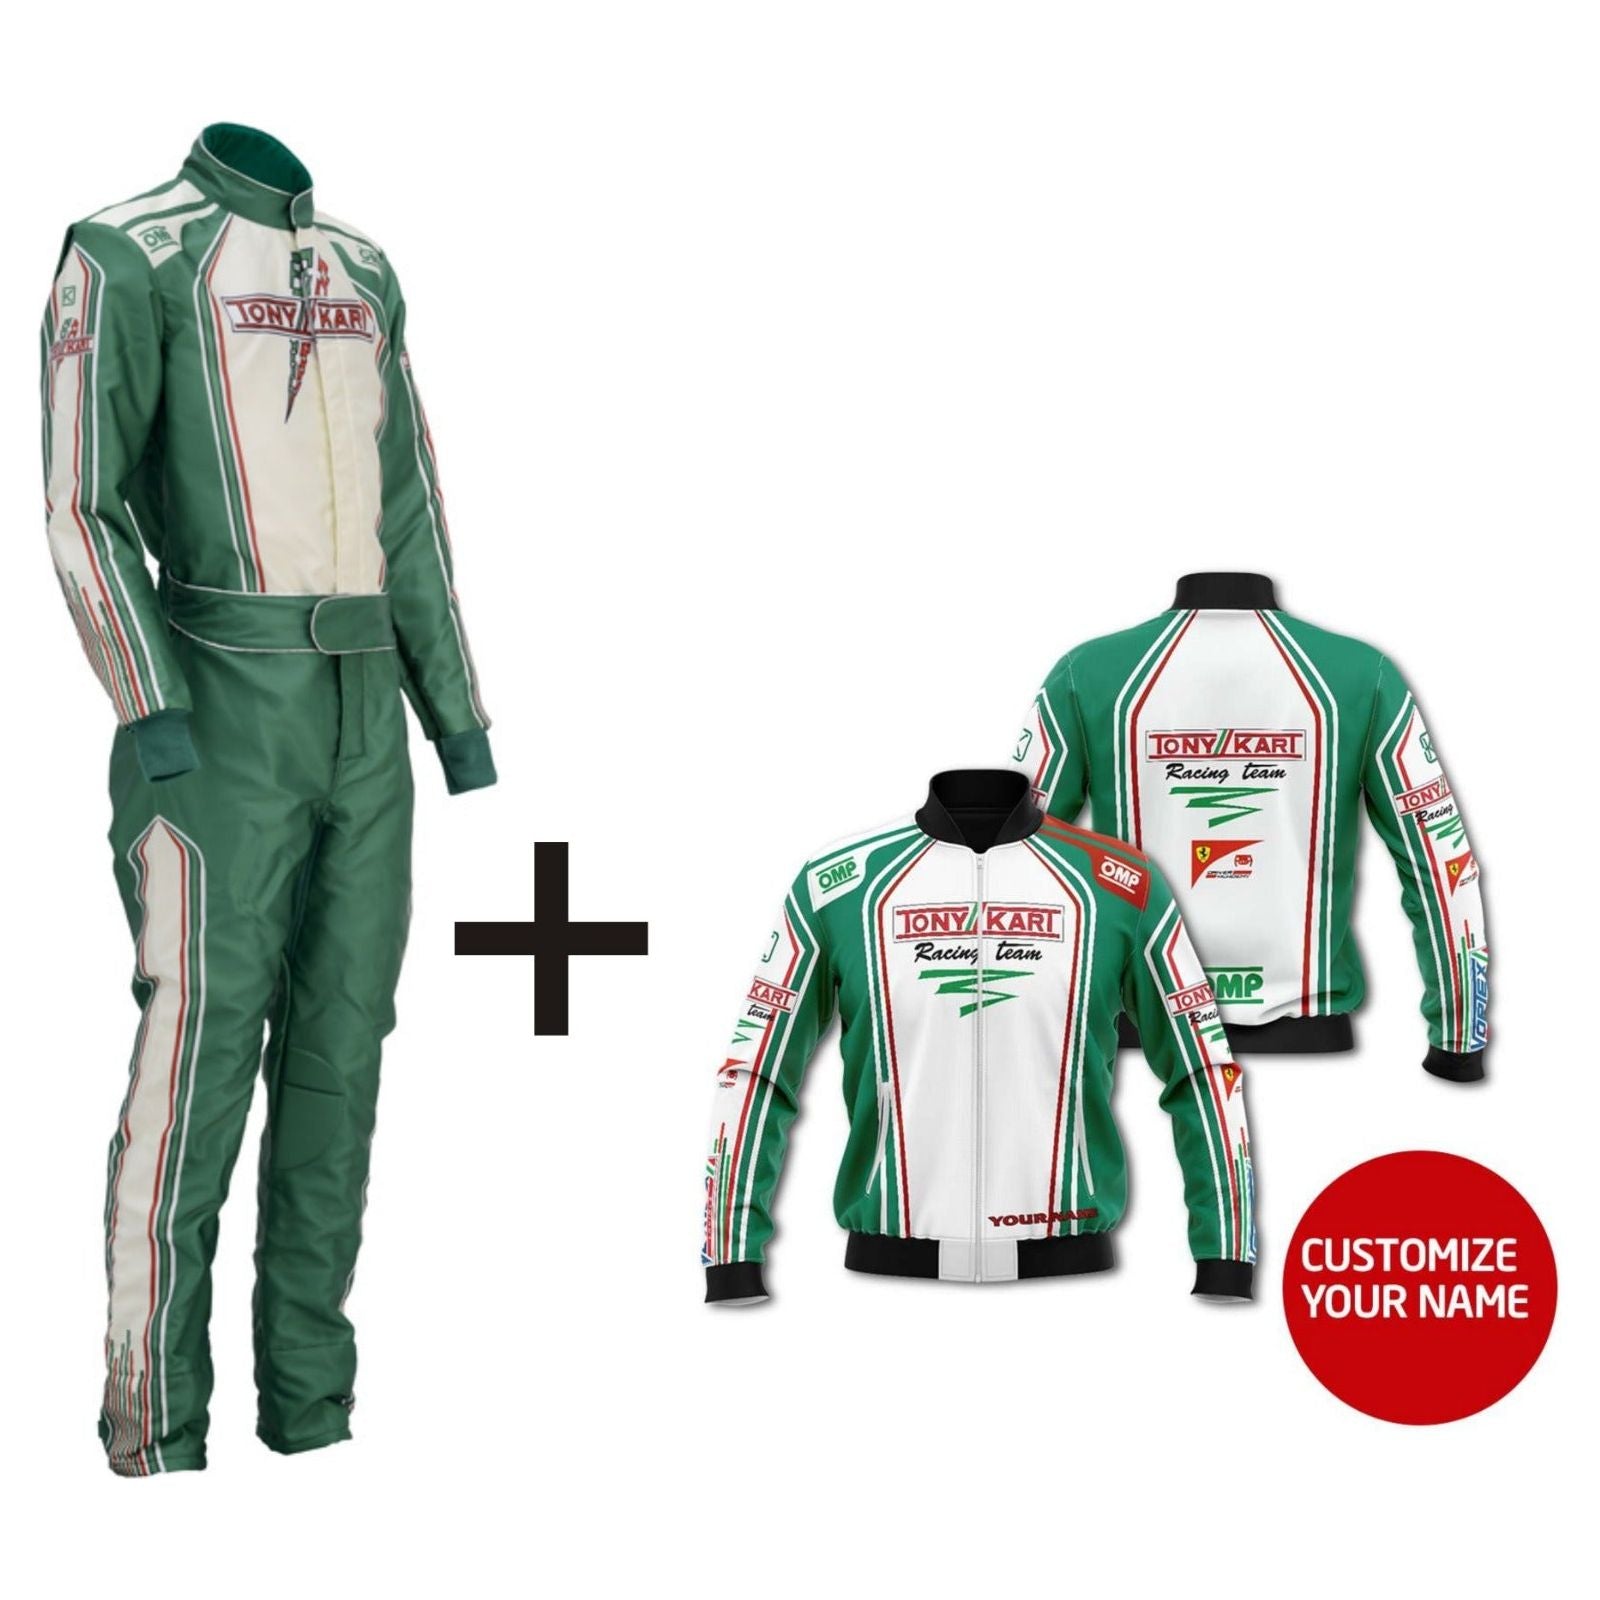 Go kart racing Sublimation Protective clothing Racing gear Suit With  Soft Shell Jacket With Digital Sublimation (All Sizes)-09